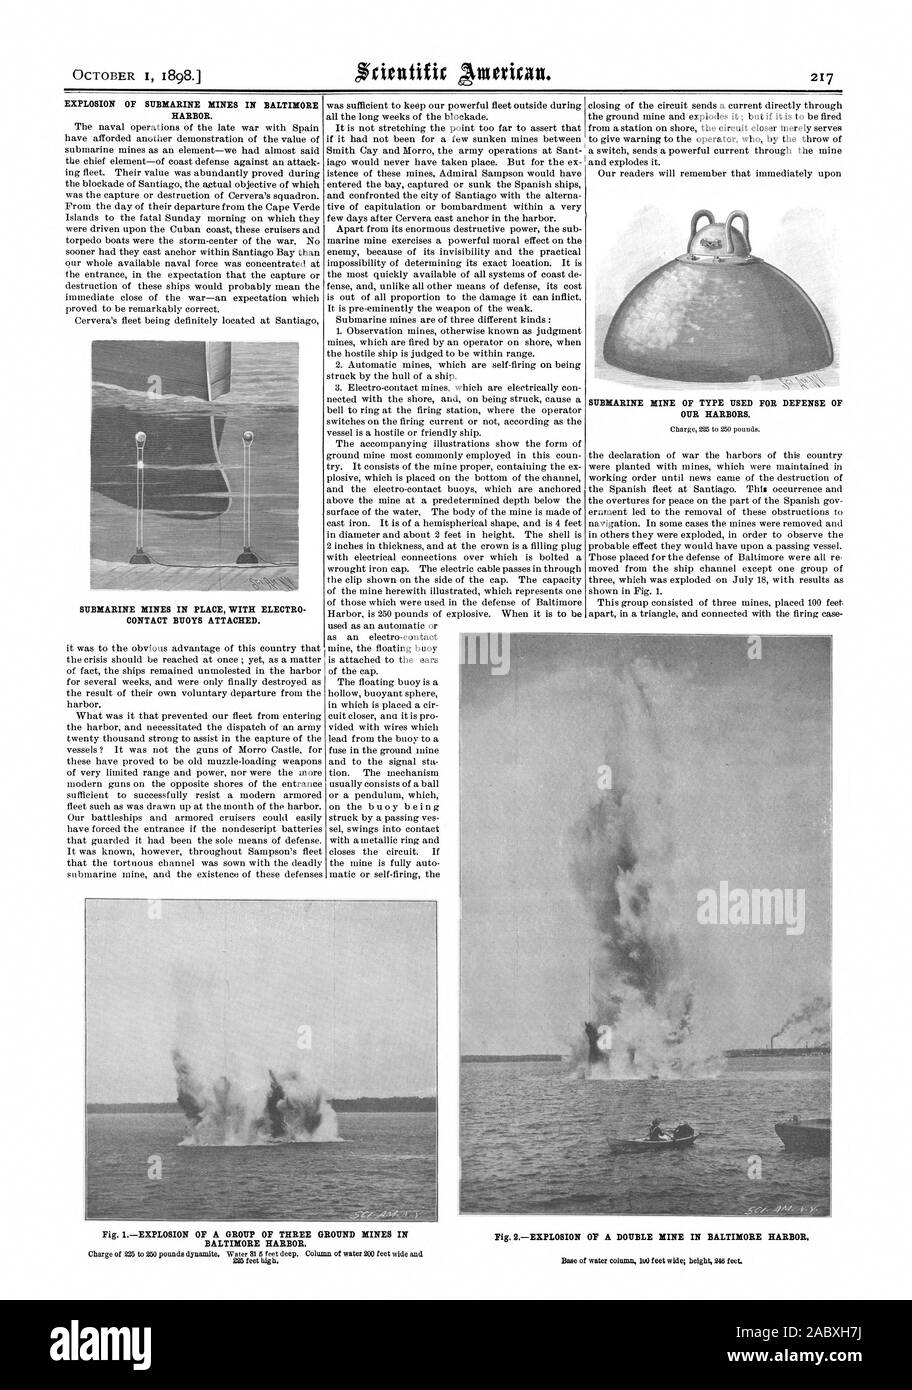 EXPLOSION OF SUBMARINE MINES IN BALTIMORE HARBOR. CONTACT BUOYS ATTACHED. OUR HARBORS. BALTIMORE HARBOR., scientific american, 1898-10-01 Stock Photo